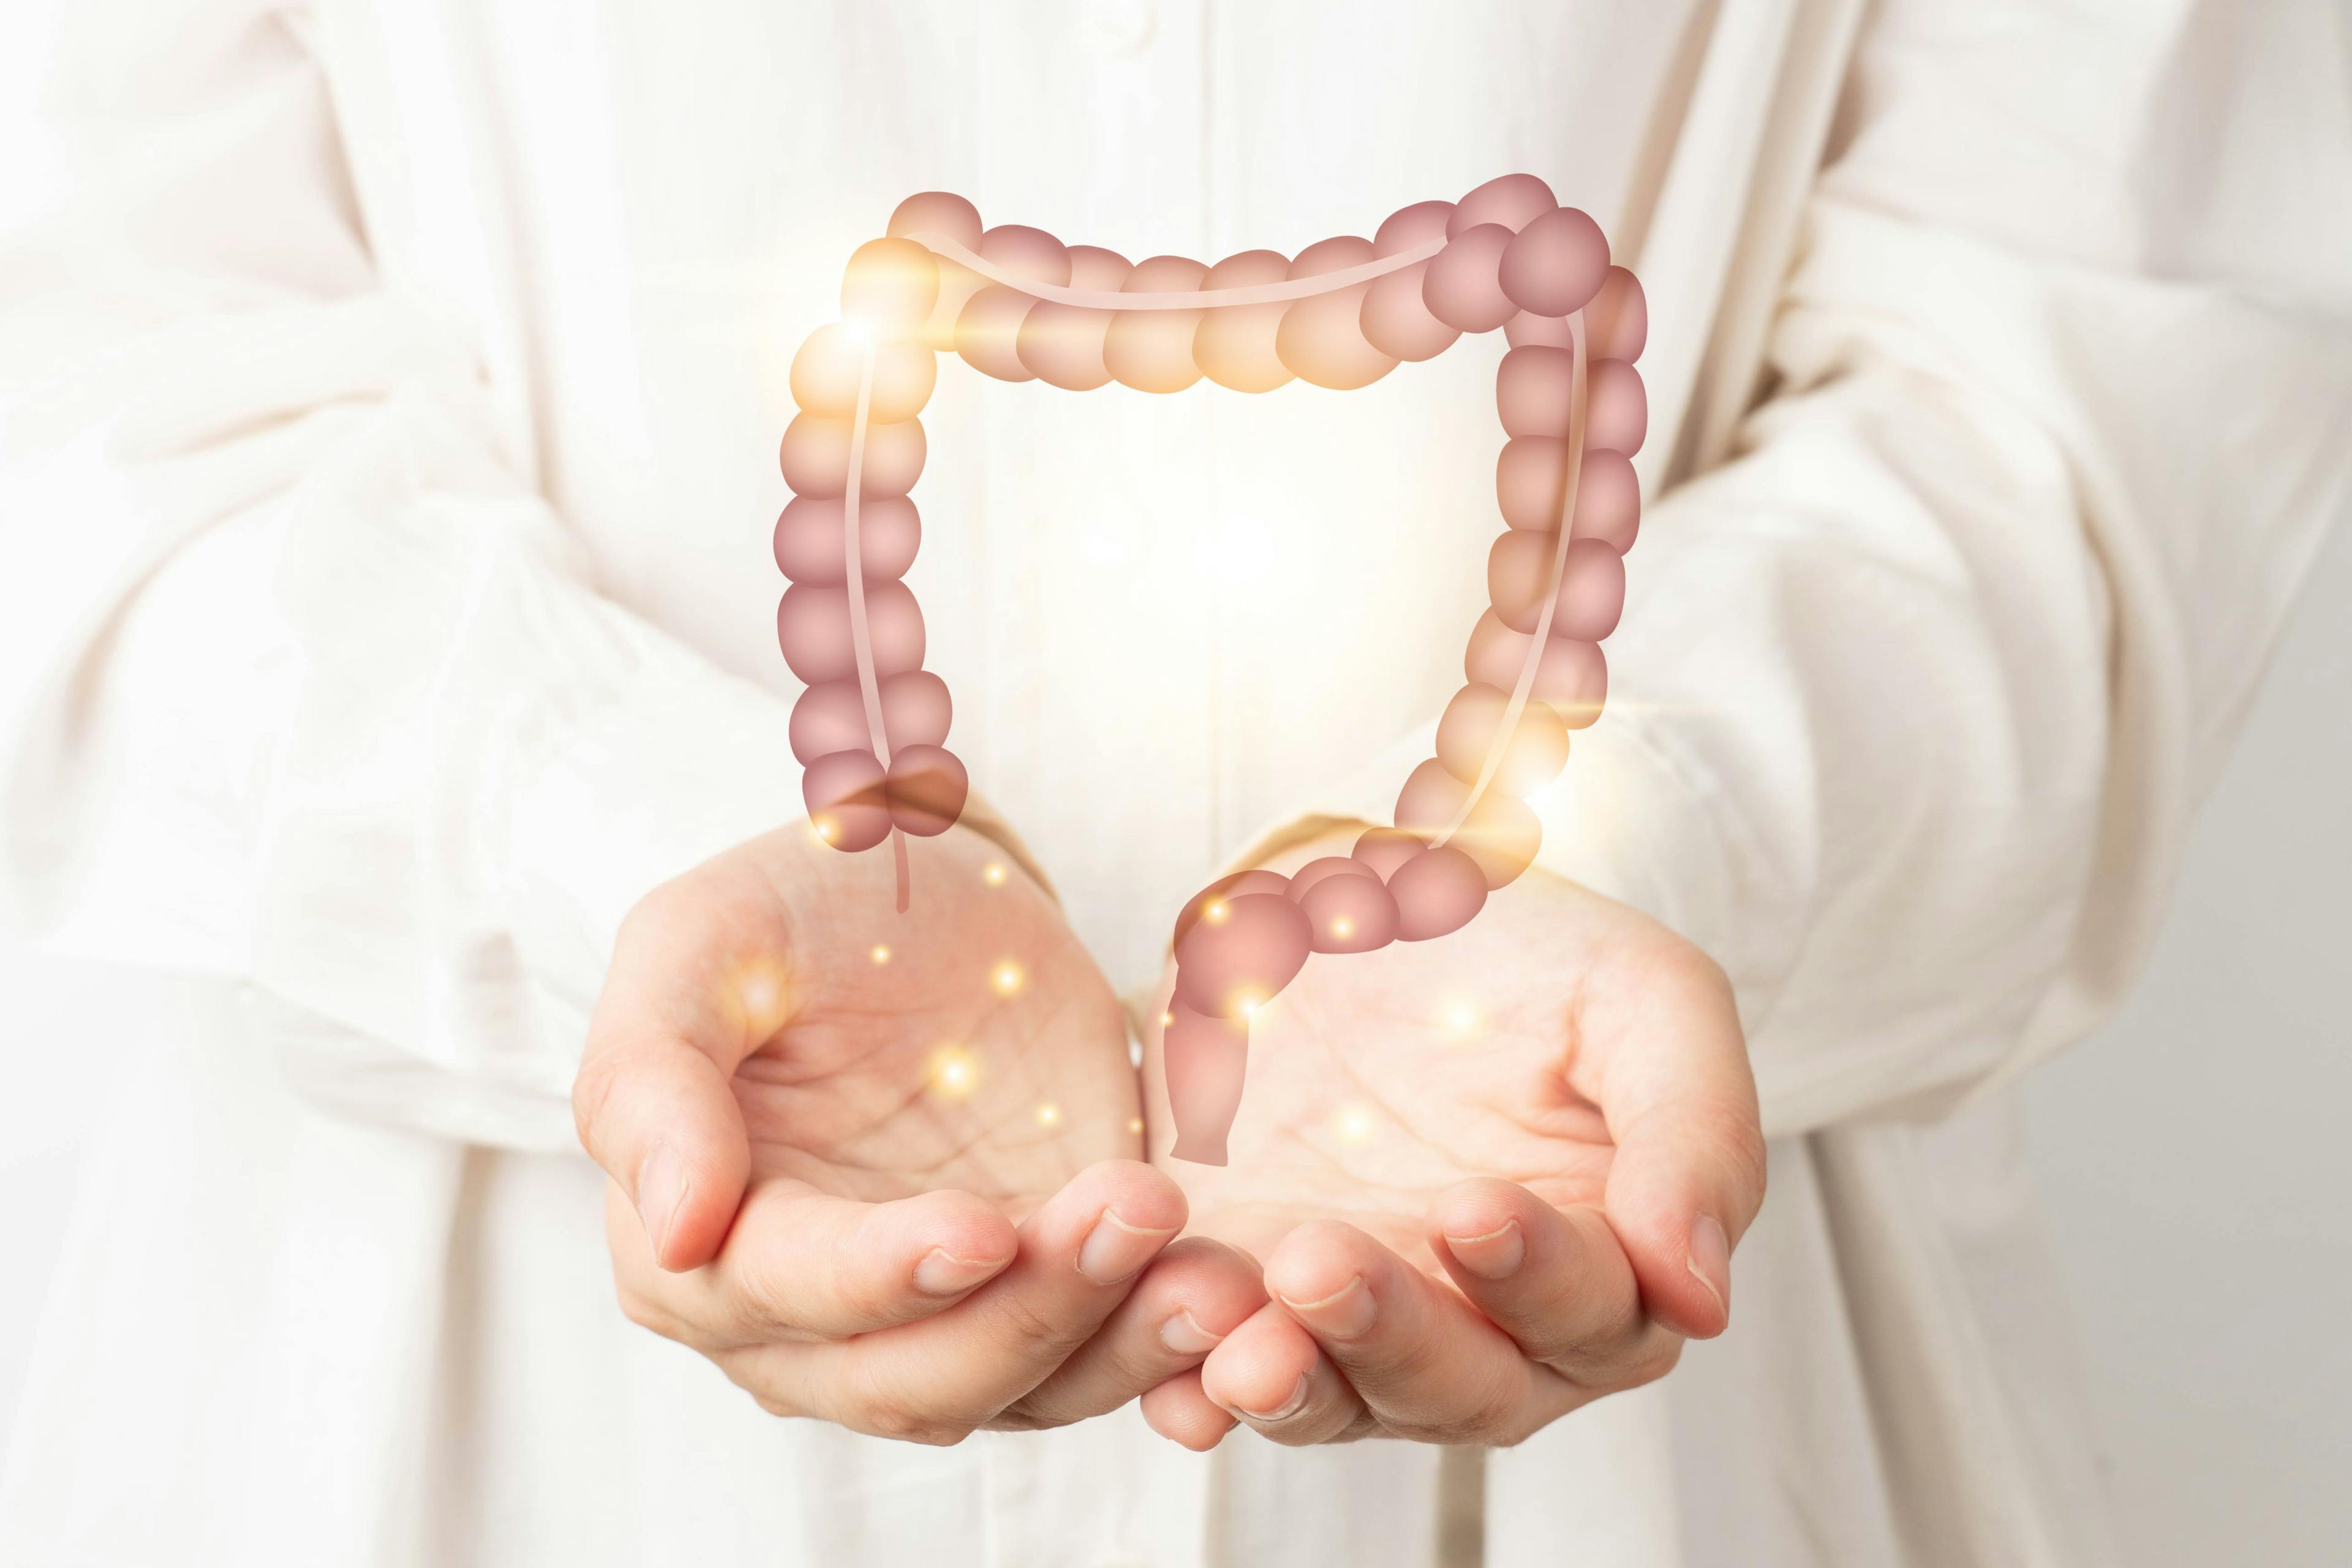 Clinical Staging of Colorectal Cancer Increased in Post–COVID-19 Period